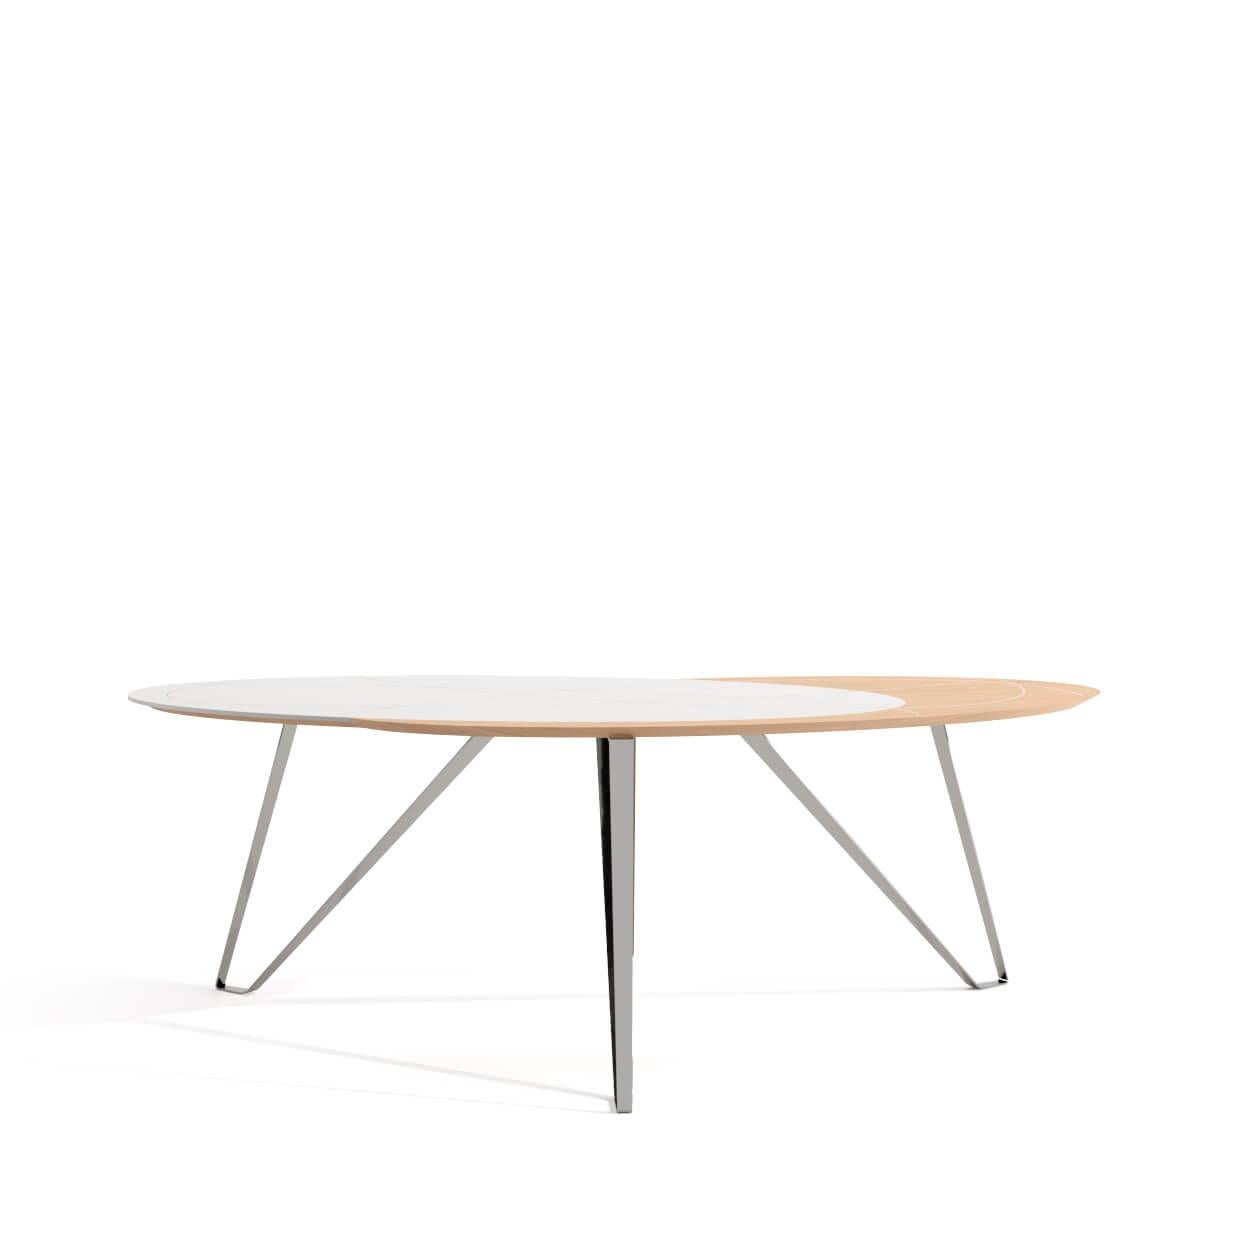 The Orbit Collection is perfect for relaxed home designs, full of light and personality. The Home Desk has an oval shape, with oak wood and white lacquered wood interconnected on its tabletop. The feet are in polished stainless steel. This piece